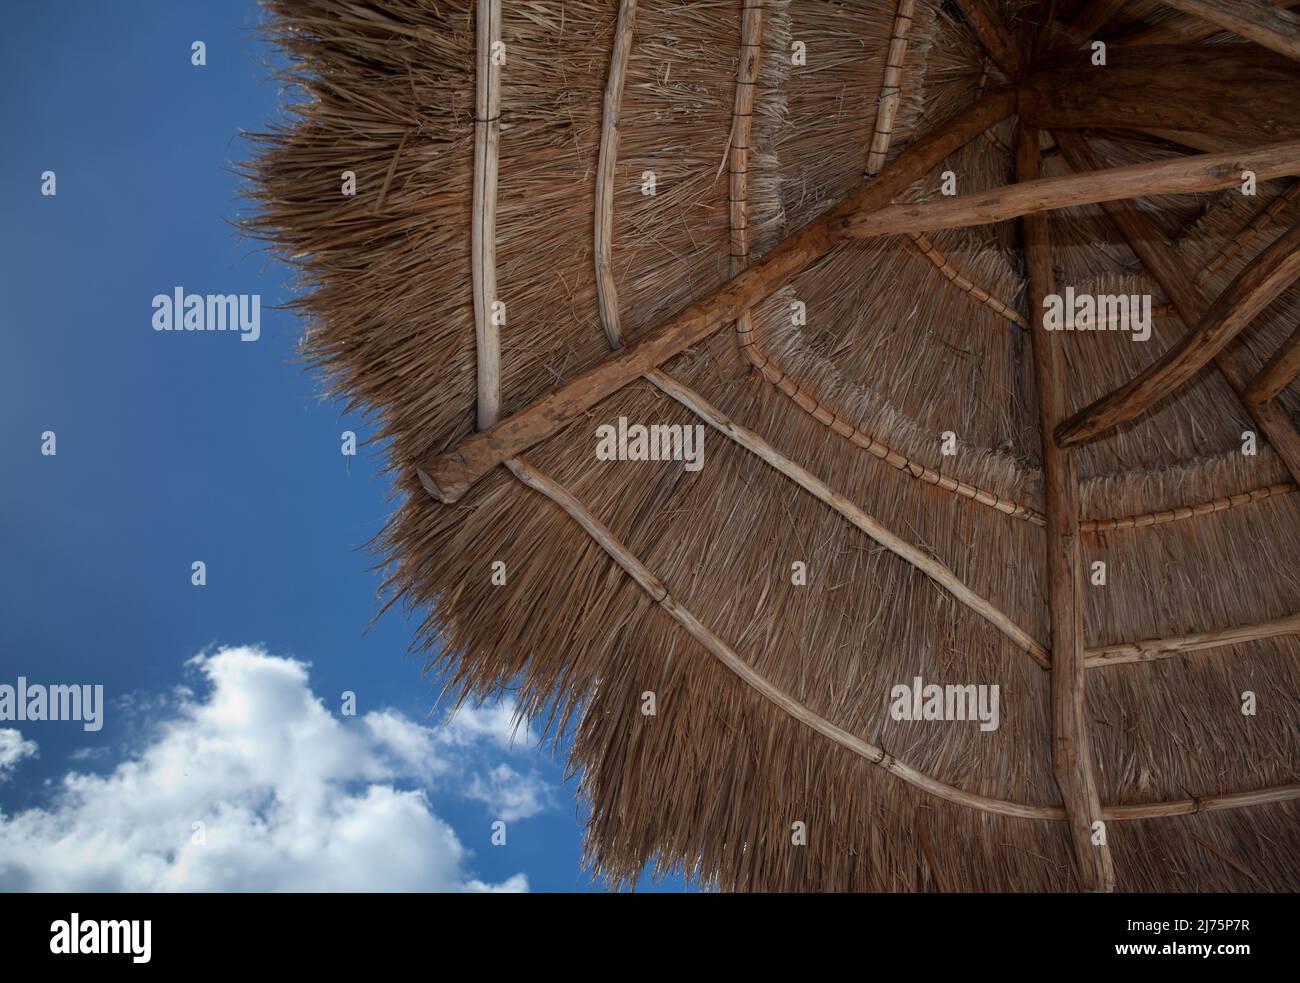 Location shot of a thatched umbrella Stock Photo